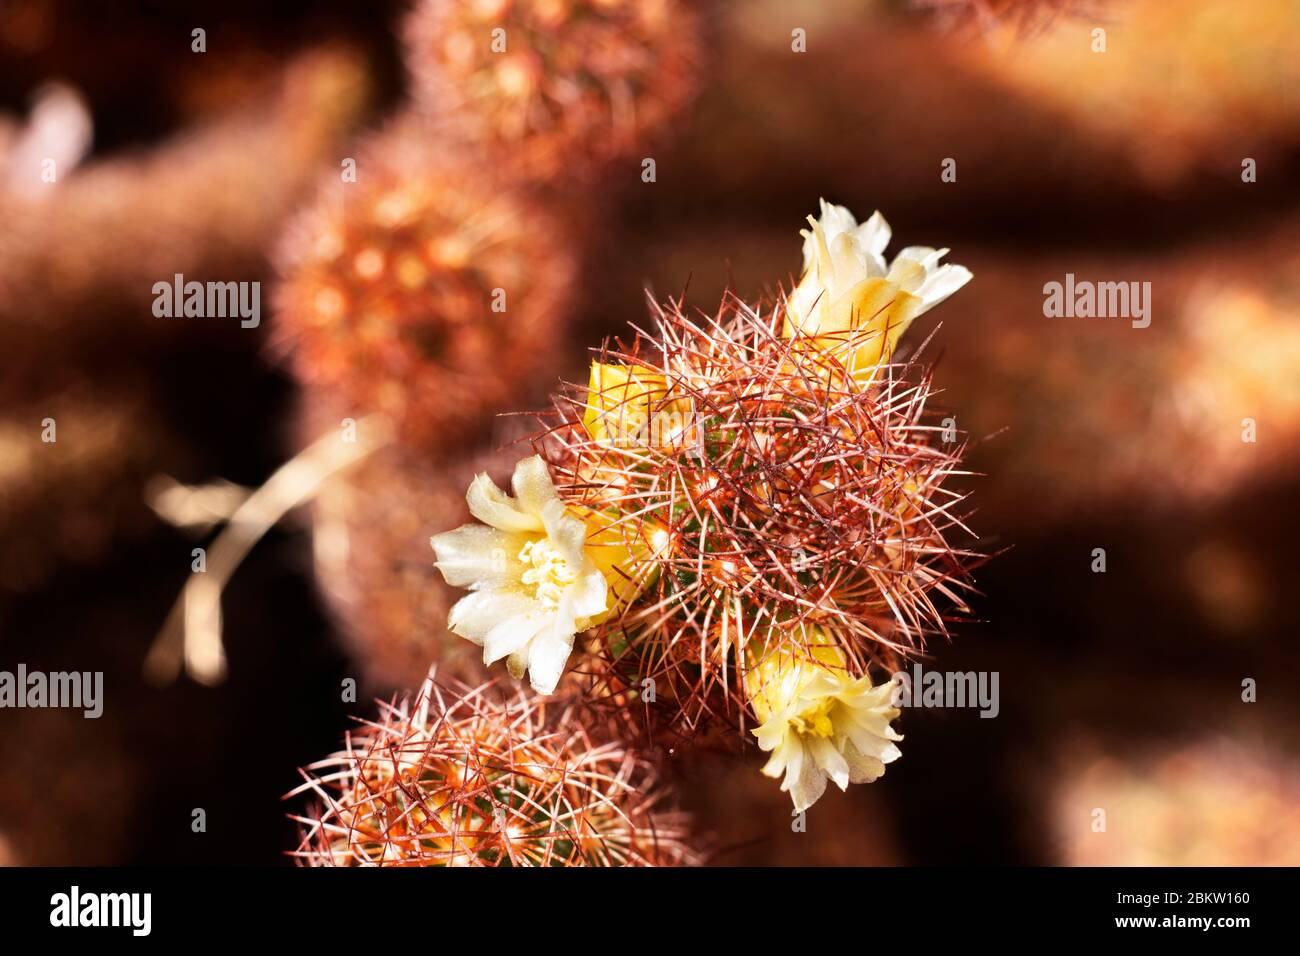 Mammillaria elongata plant -gold lace cactus  or lady finger cactus - ,plant with oval stems covered with brown spines with white -yellow flowers Stock Photo